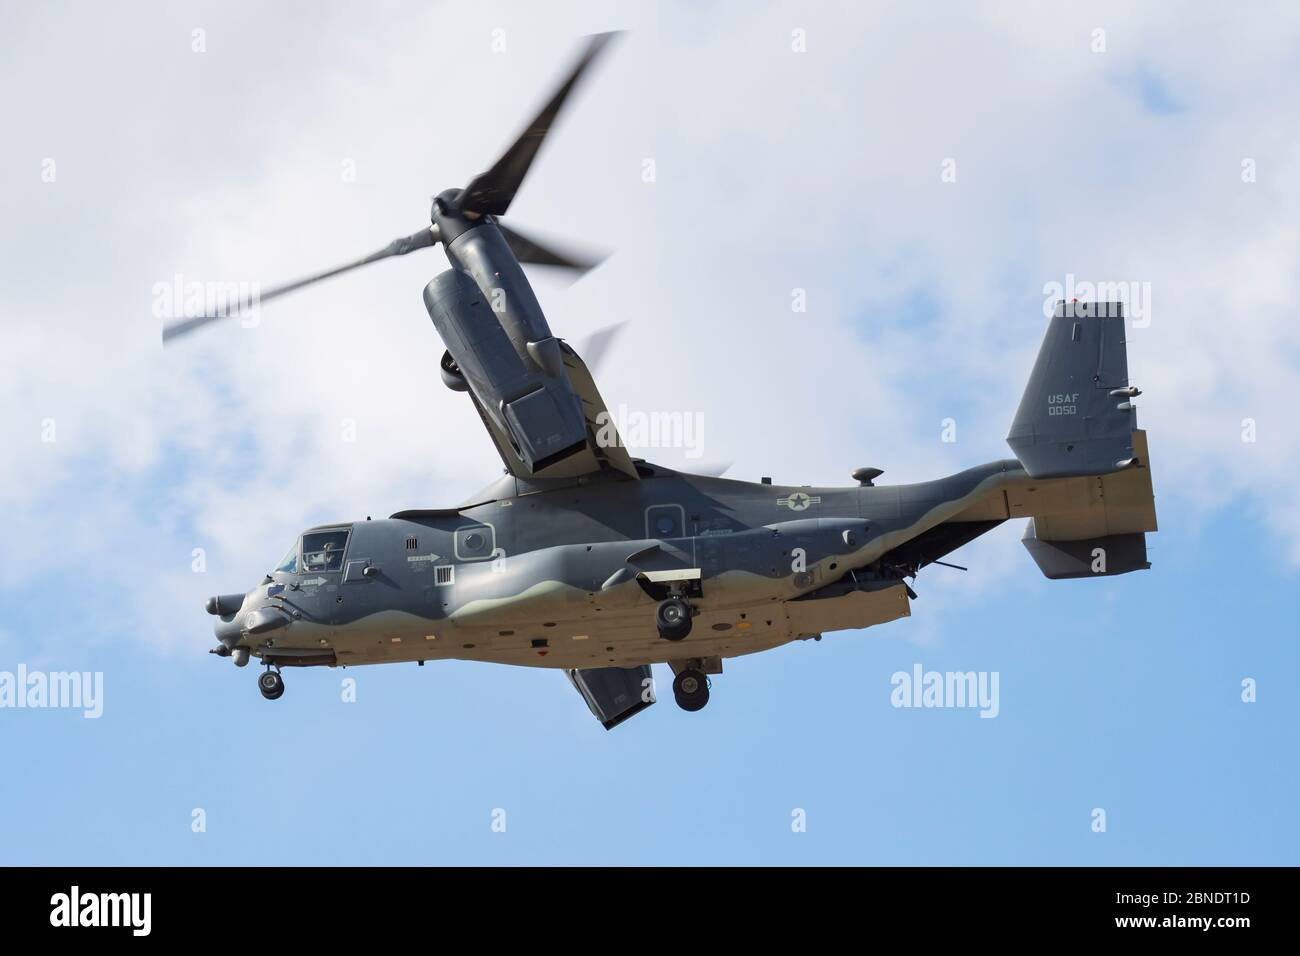 FAIRFORD / UNITED KINGDOM - JULY 12, 2018: United States Air Force USAF Boeing CV-22B Osprey 08-0050 convertiplane arrival and landing for RIAT Royal Stock Photo